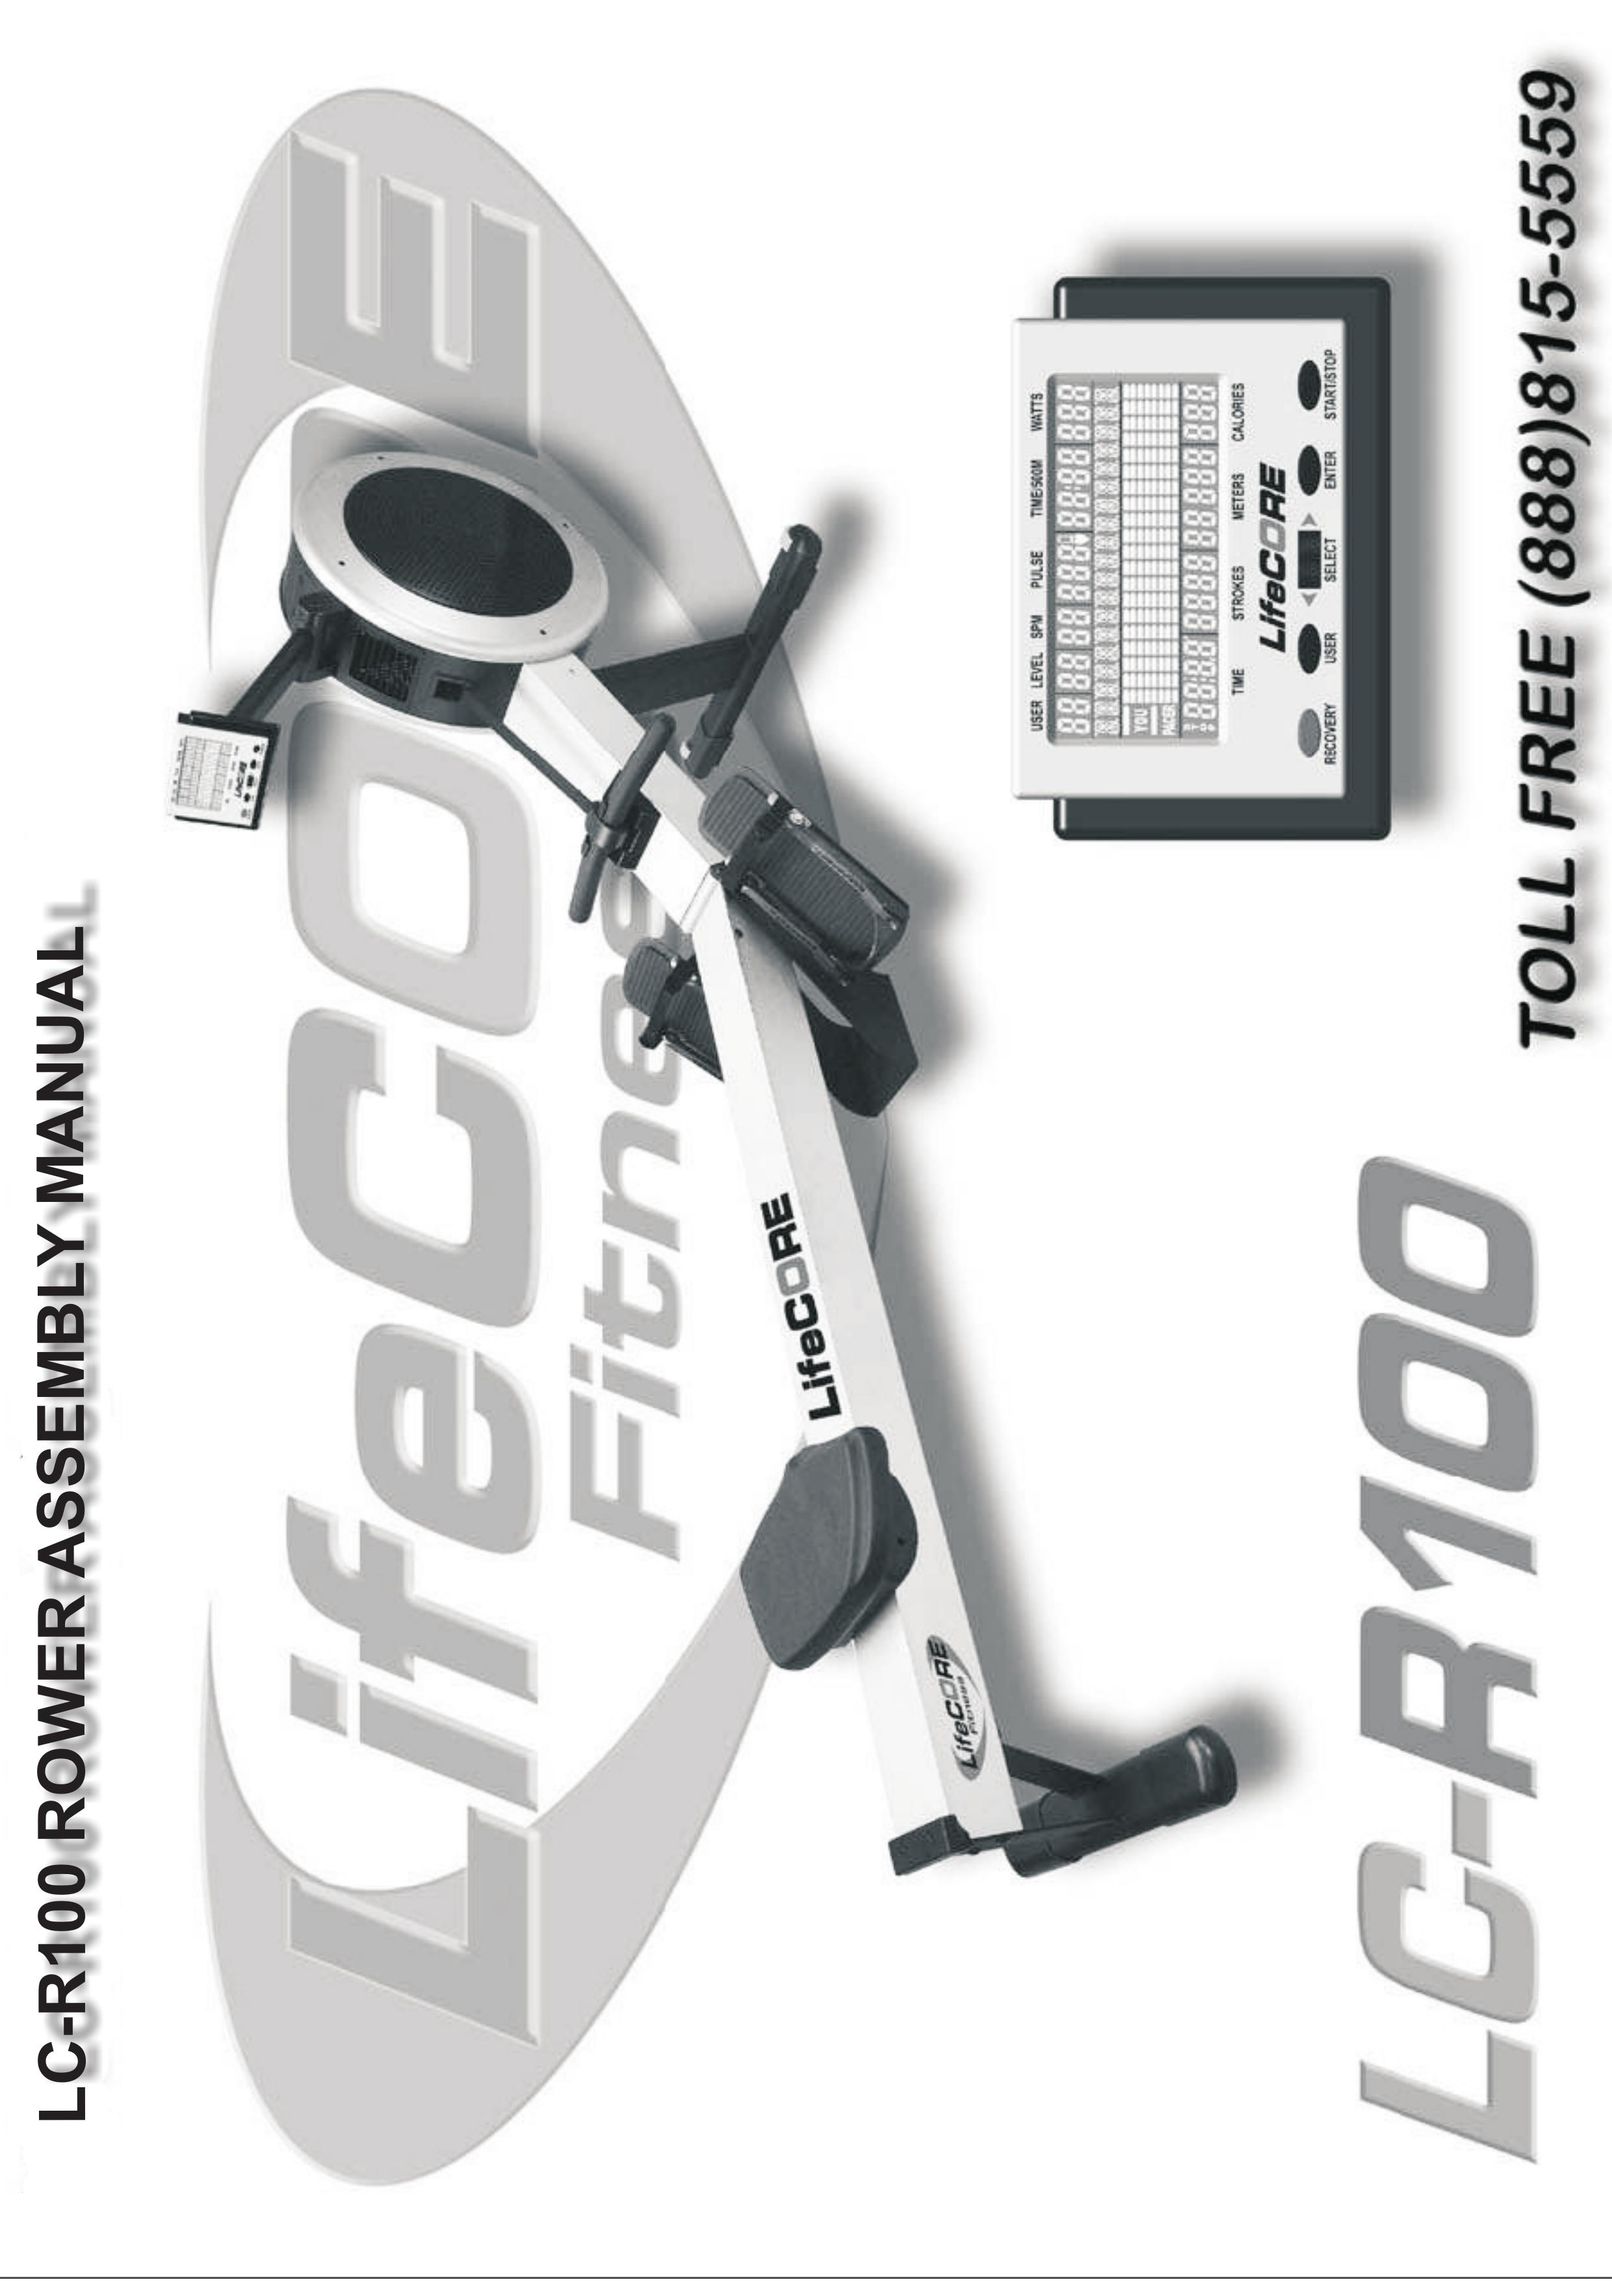 LifeCore Fitness LC-R100 Rowing Machine User Manual